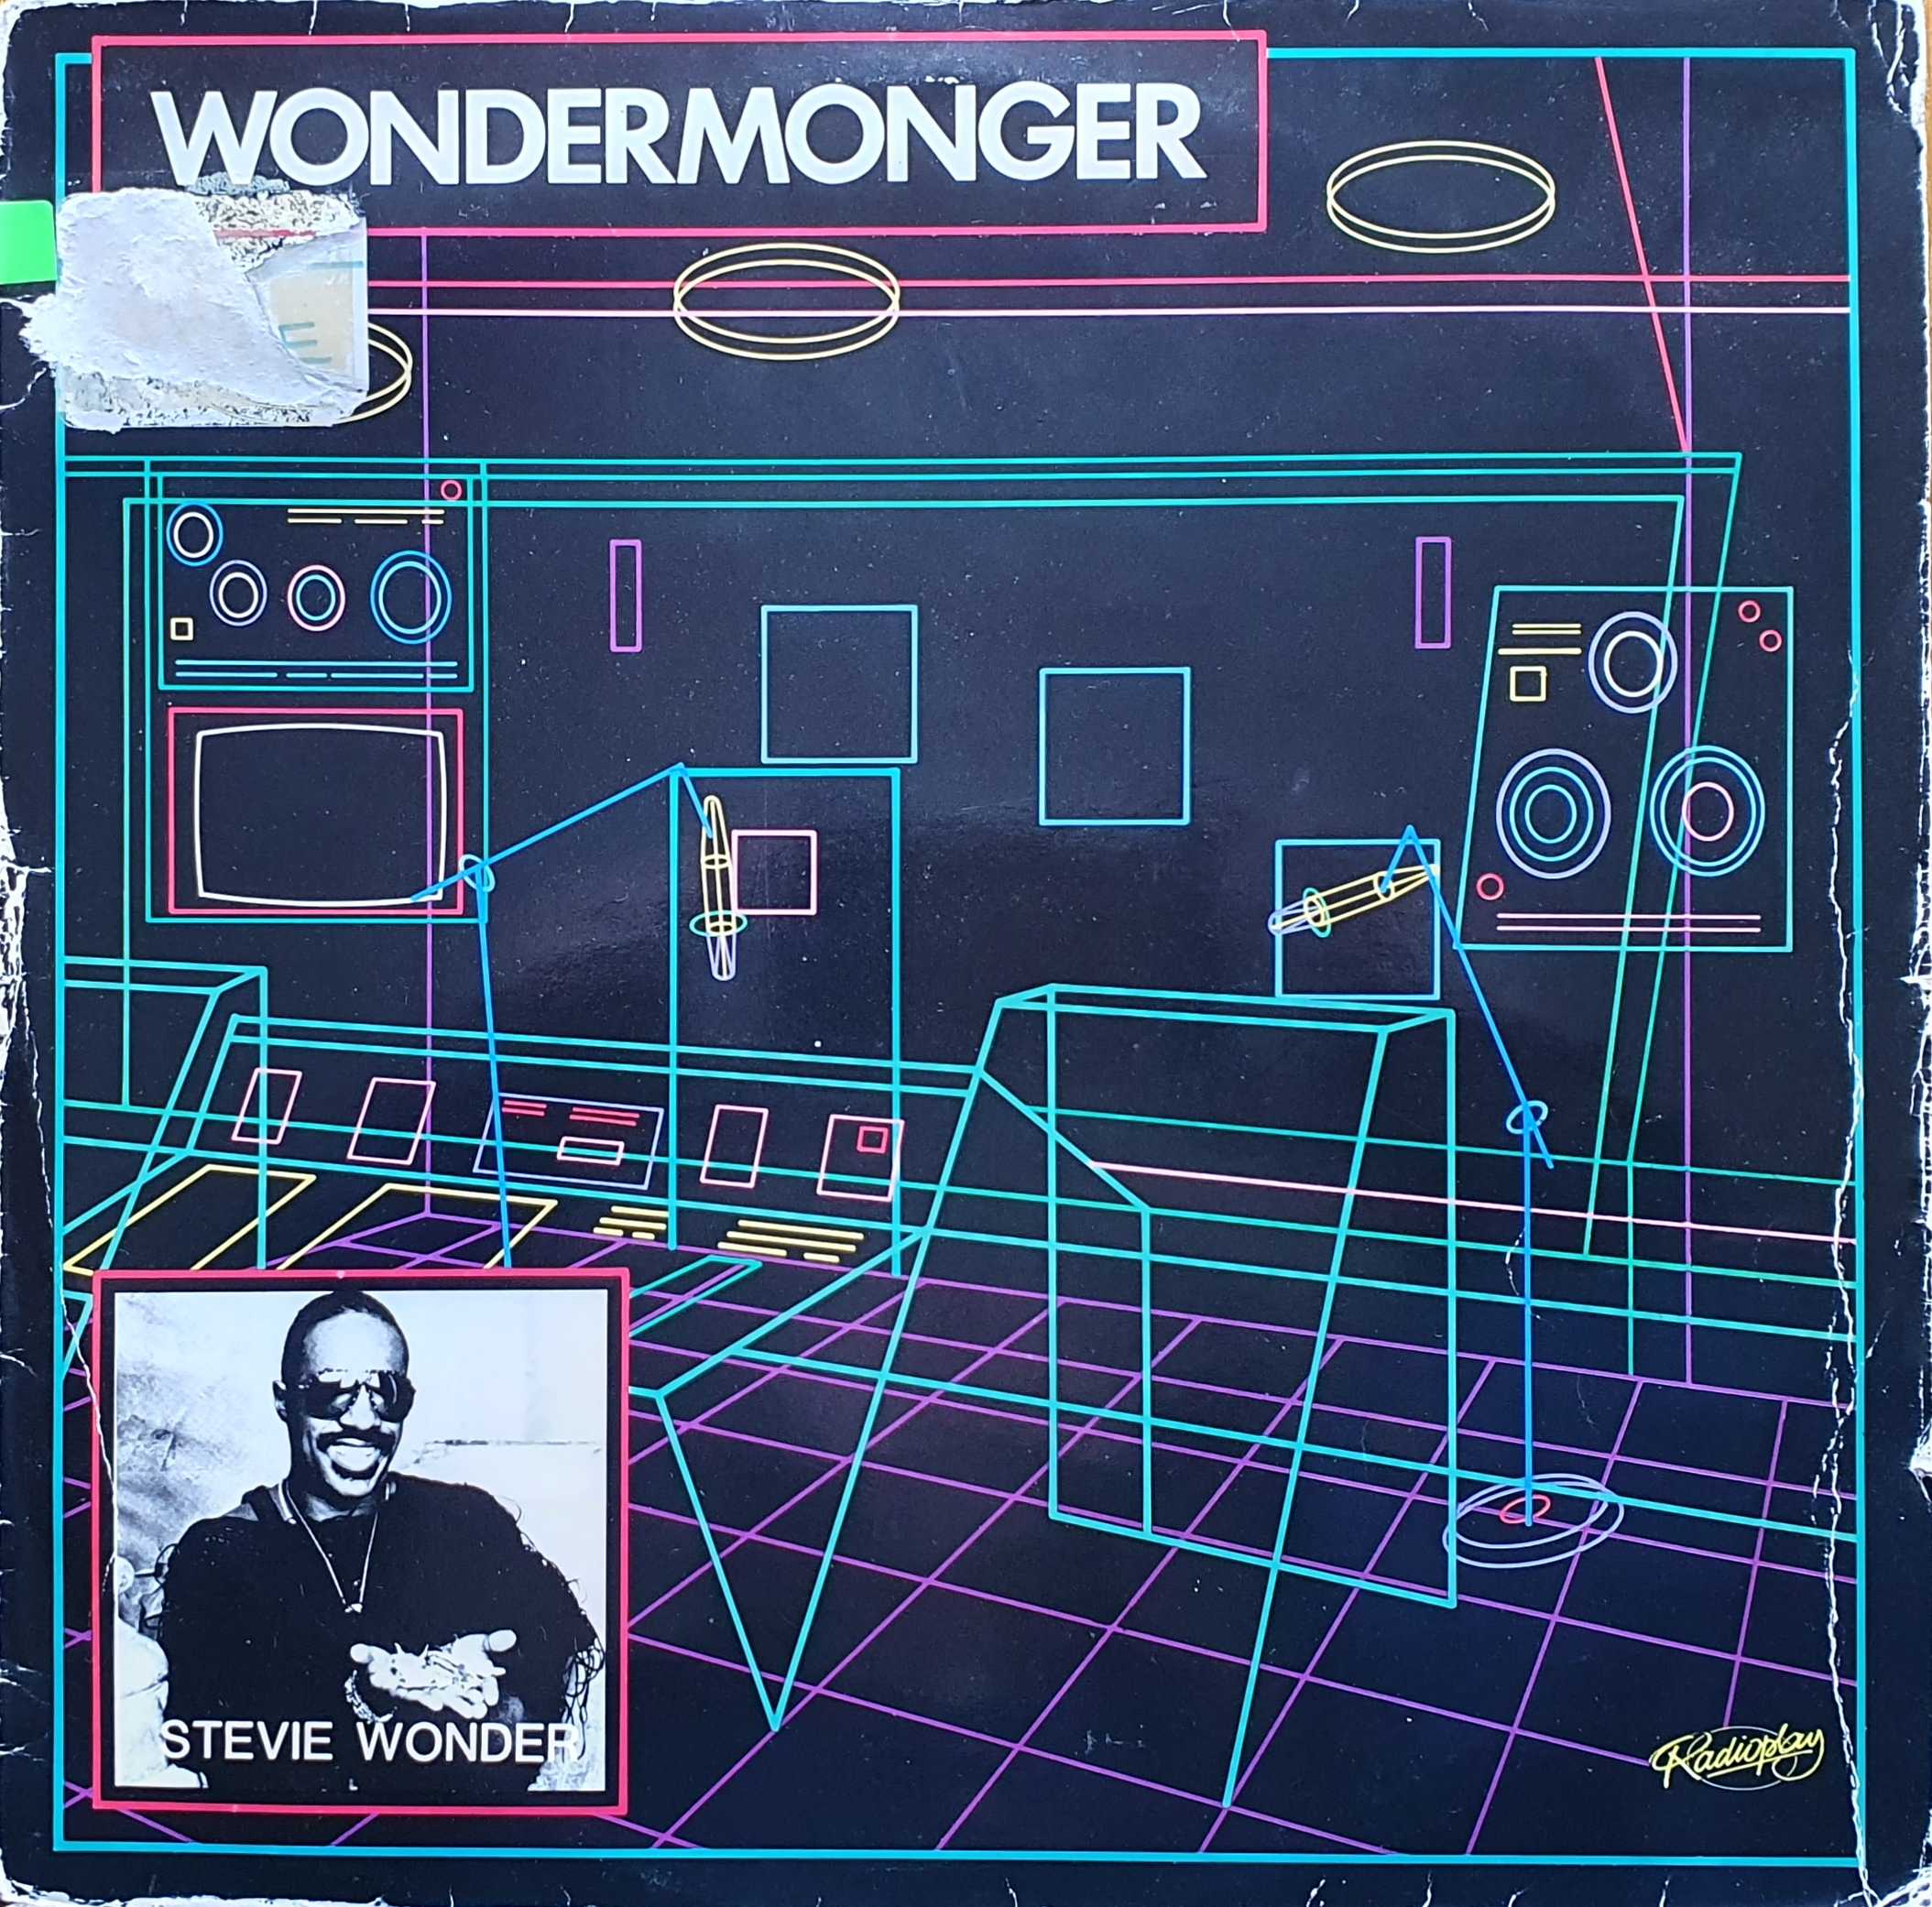 Picture of TAIR 87025 Wonder monger by artist Stevie Wonder from the BBC albums - Records and Tapes library